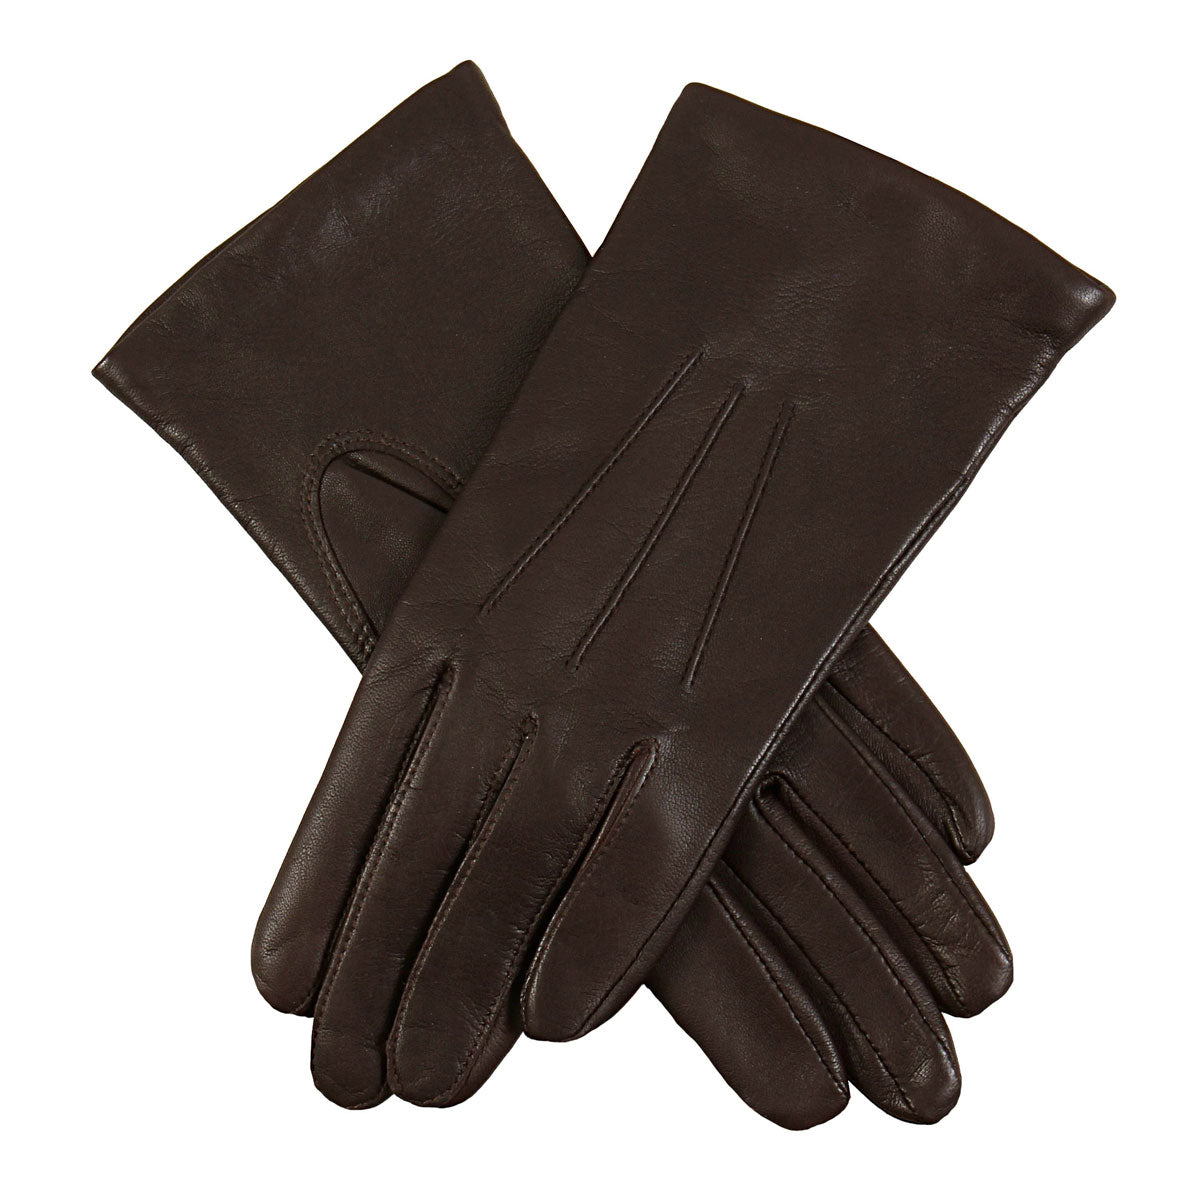 Women's classic leather gloves in mocca